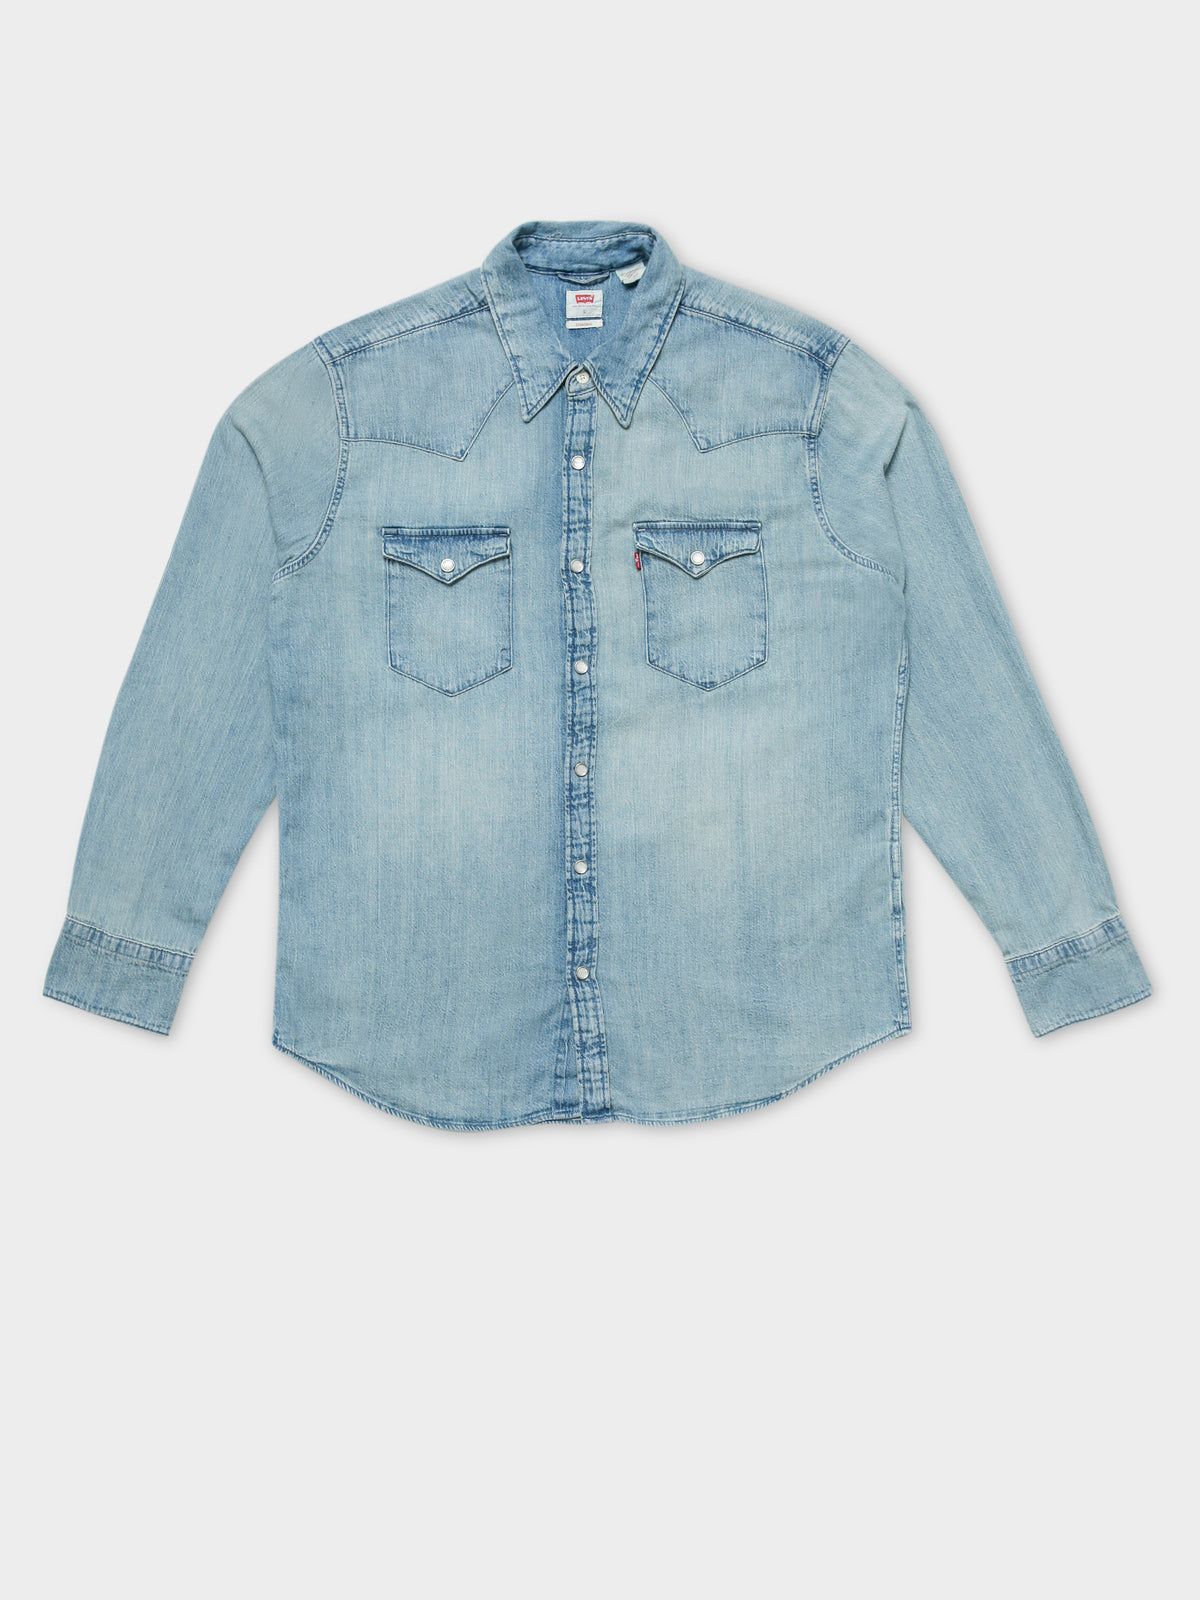 Barstow Western Denim Shirt in Red Cast Stone Blue